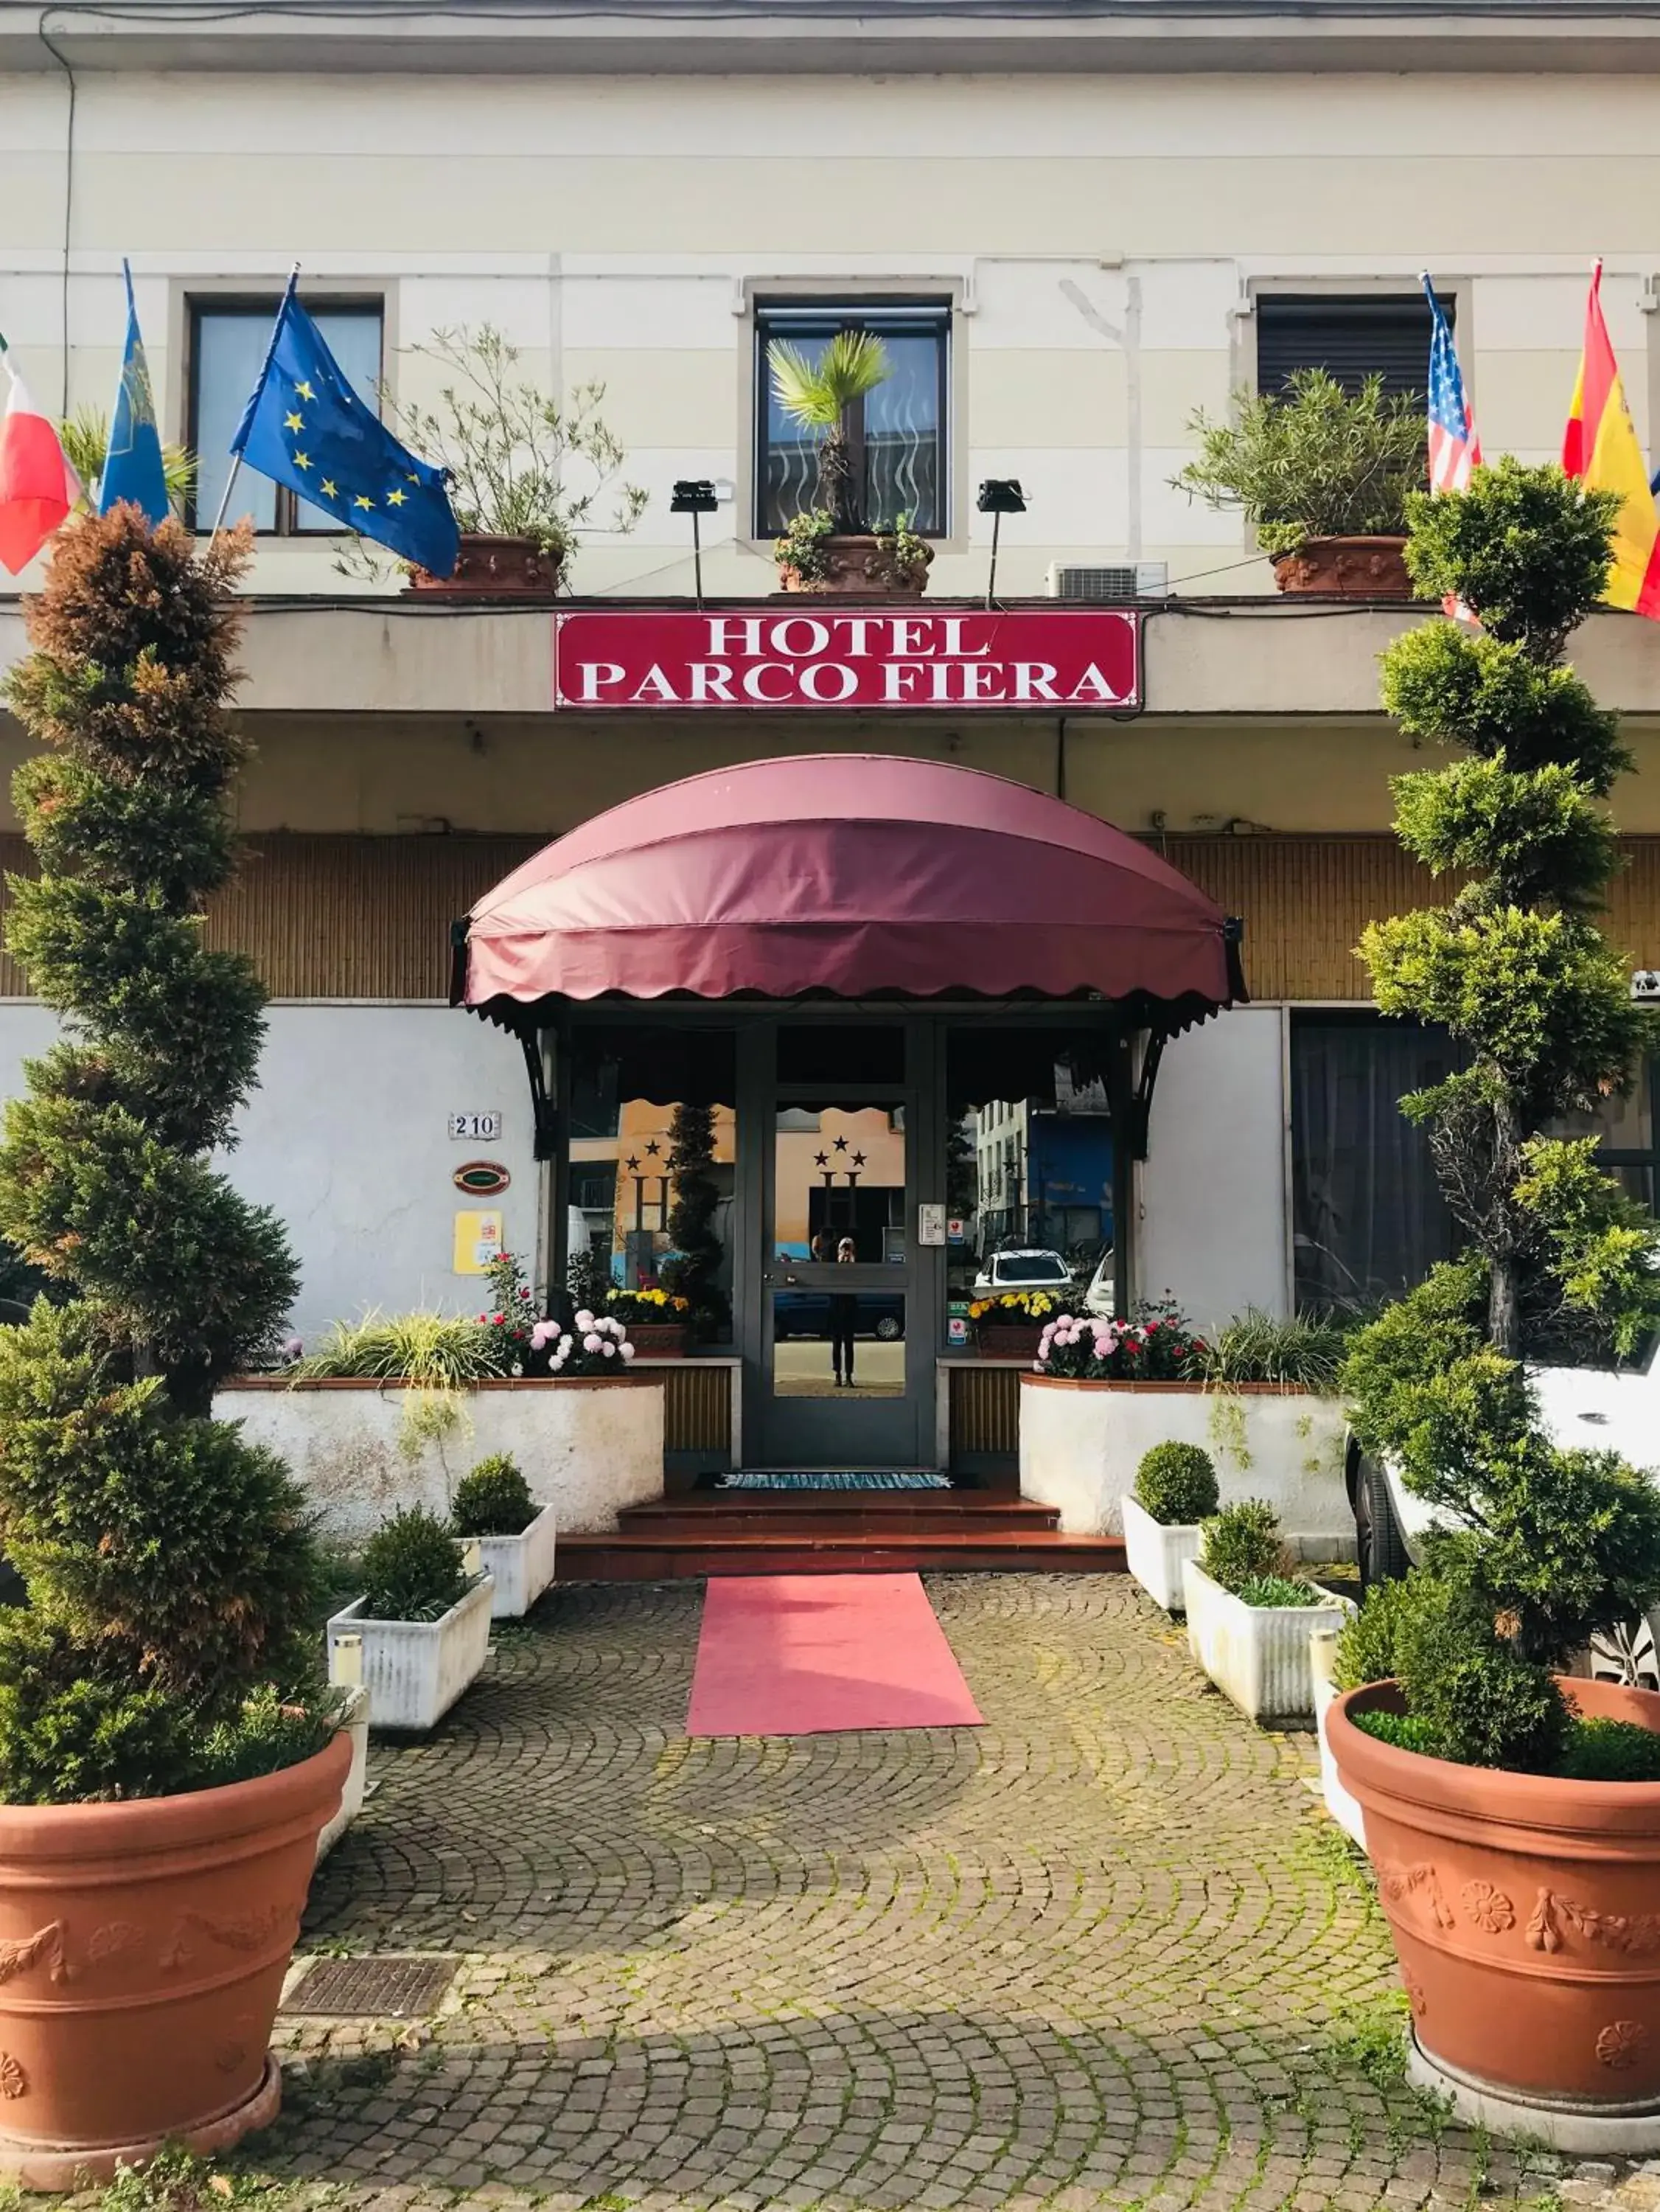 Property building in Hotel Parco Fiera